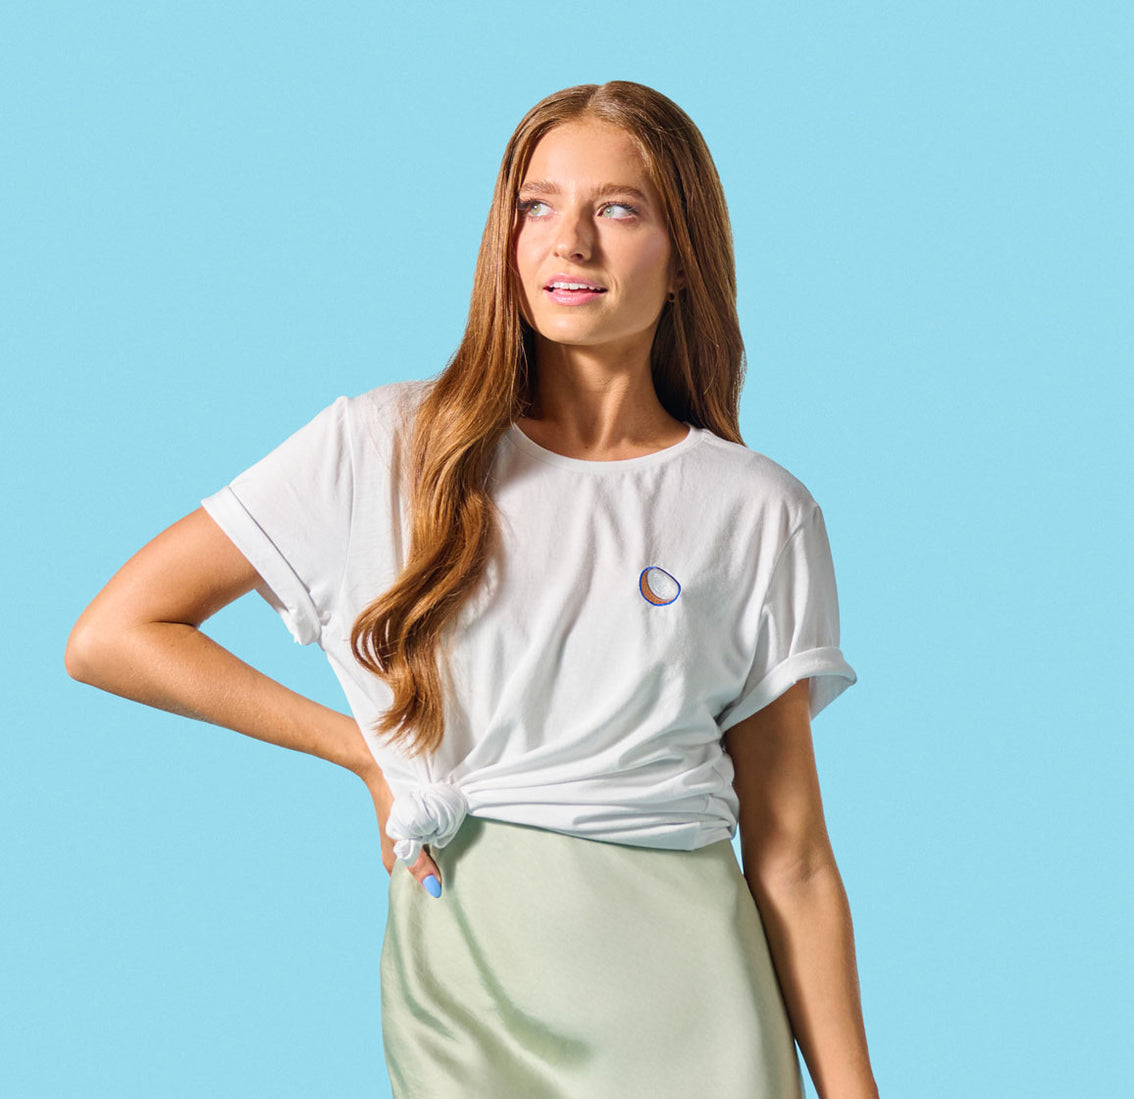 An Embroidered Coconut Crewneck Tee paired with a green skirt creates a stylish and versatile wardrobe staple for women who appreciate Vita Coco's coconut goodness.